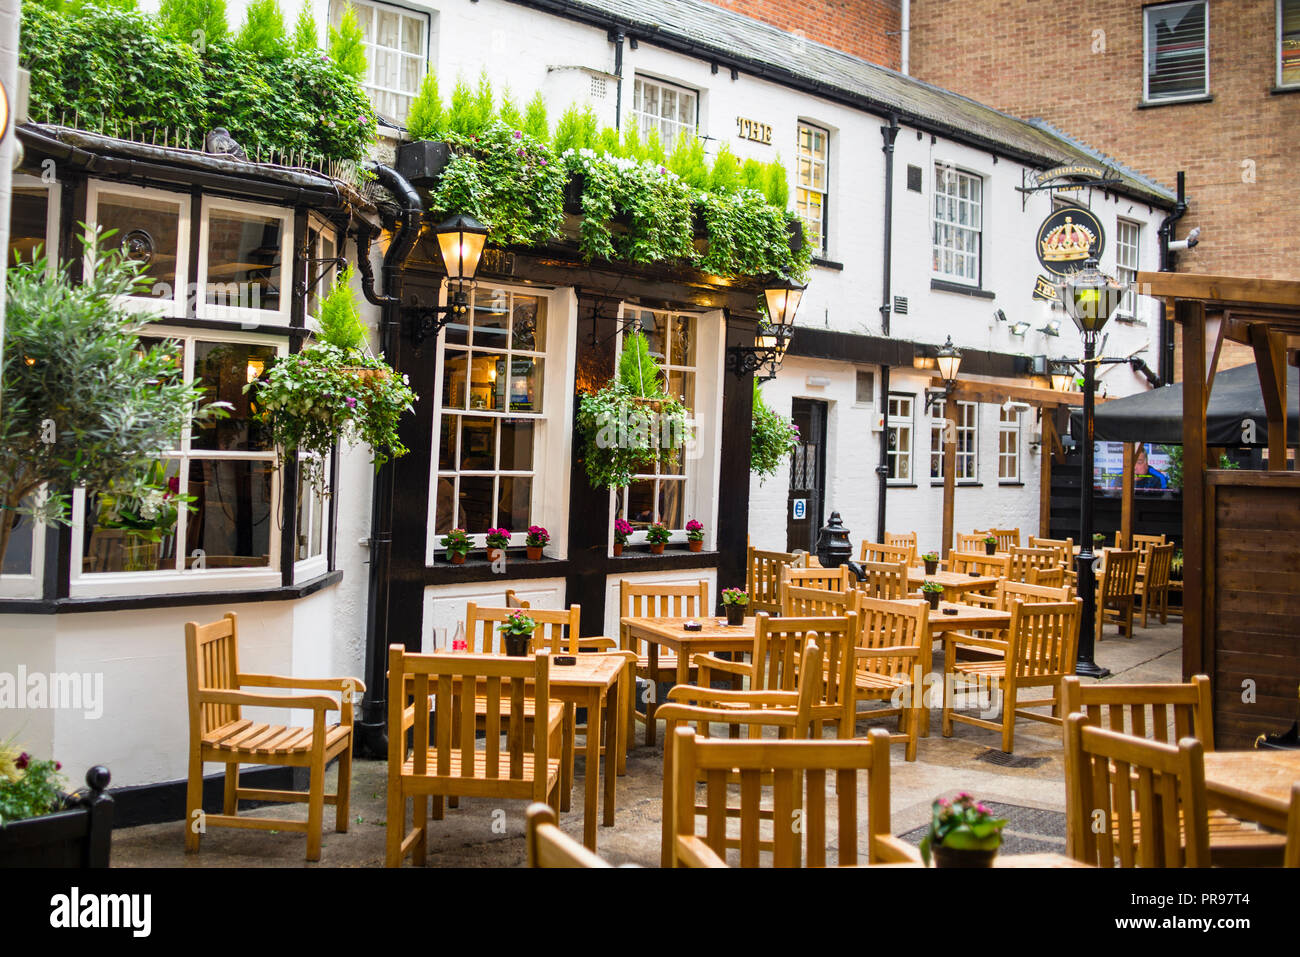 The Crown pub in Oxford, England has an outdoor courtyard and historical charm inside. Stock Photo